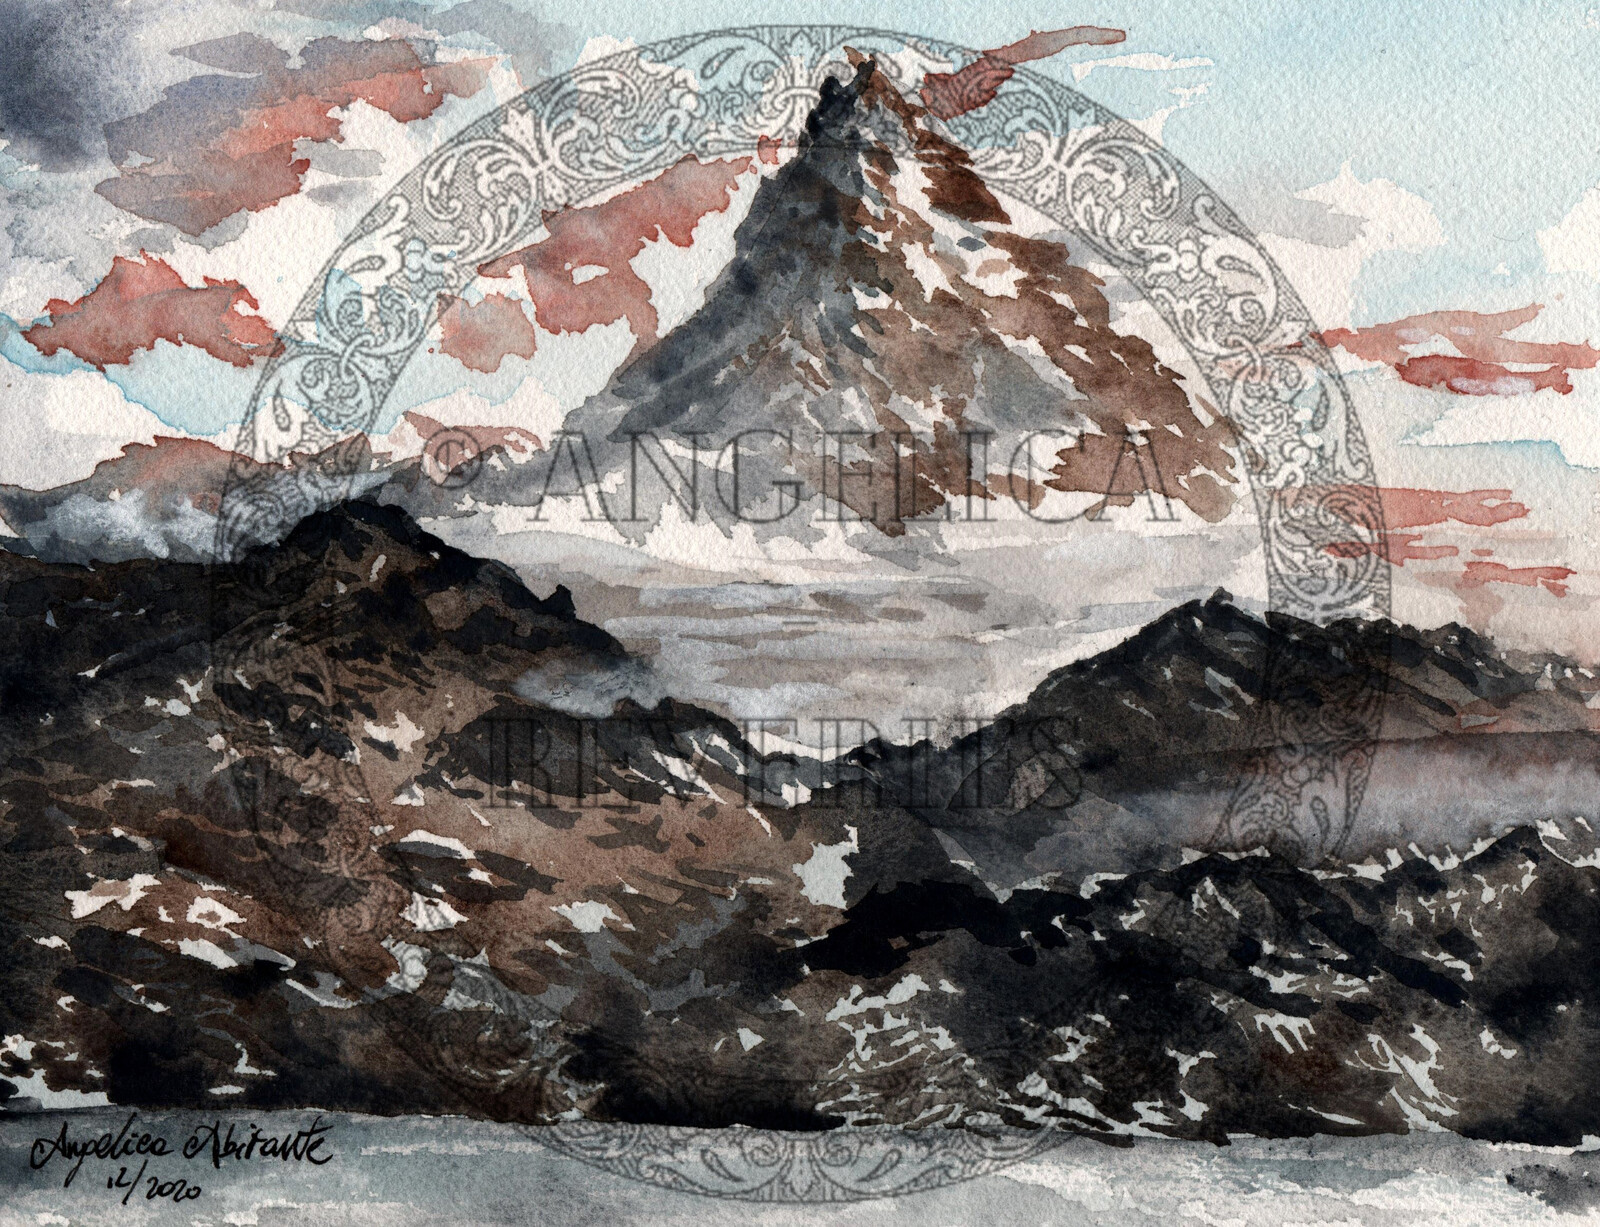 Watercolor painting of Erebor, the Lonely Mountain, form the Hobbit movies.